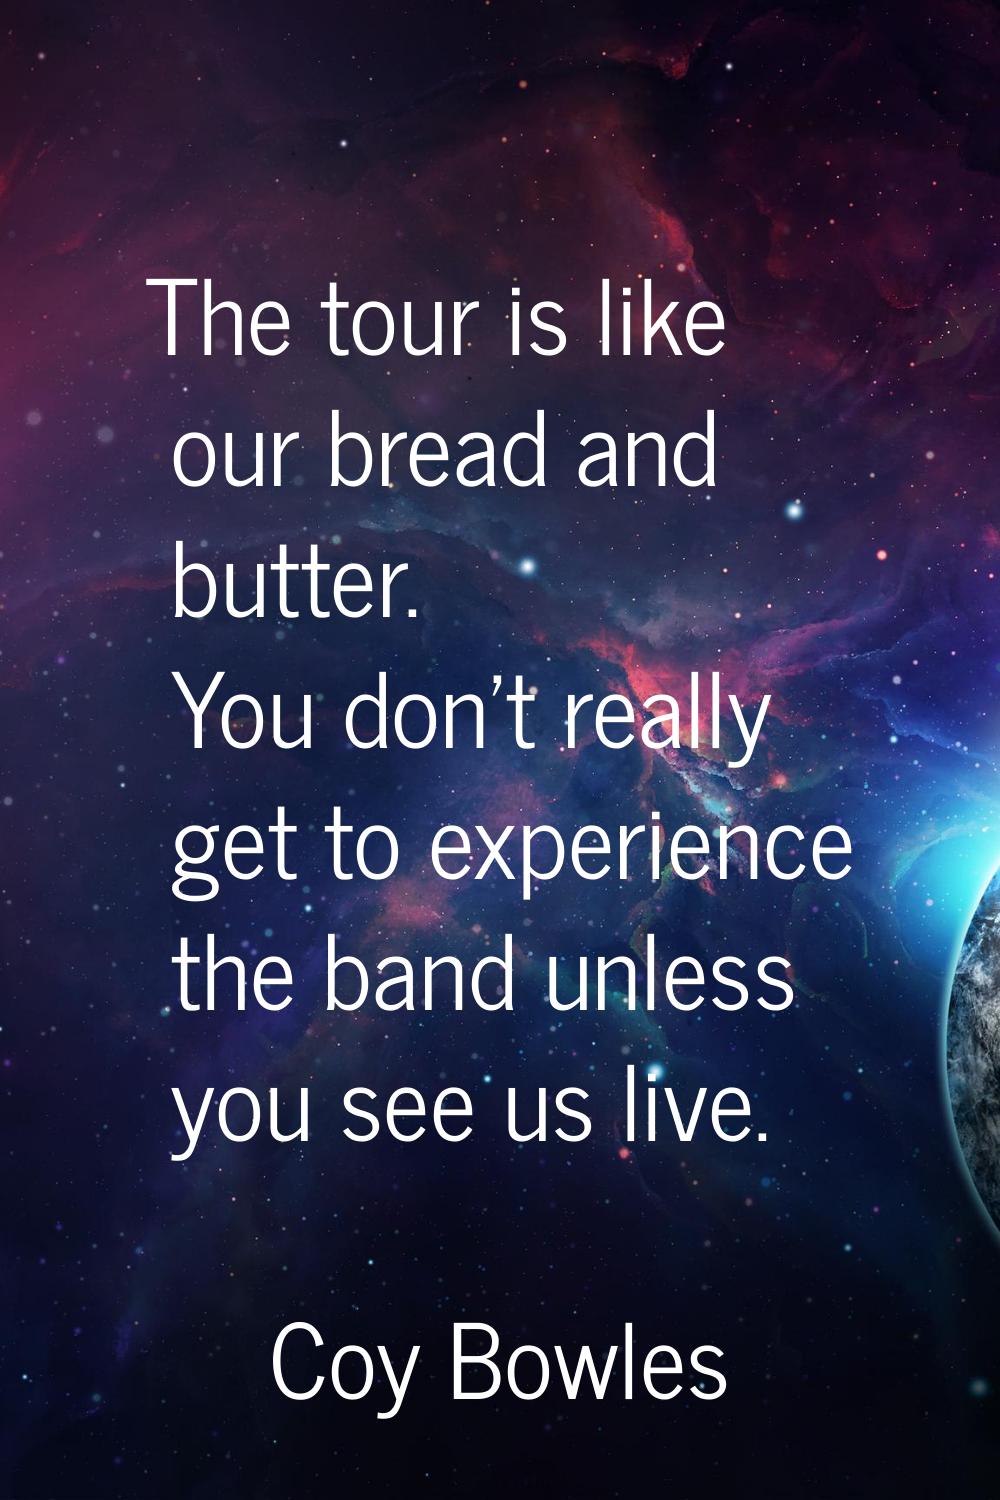 The tour is like our bread and butter. You don't really get to experience the band unless you see u